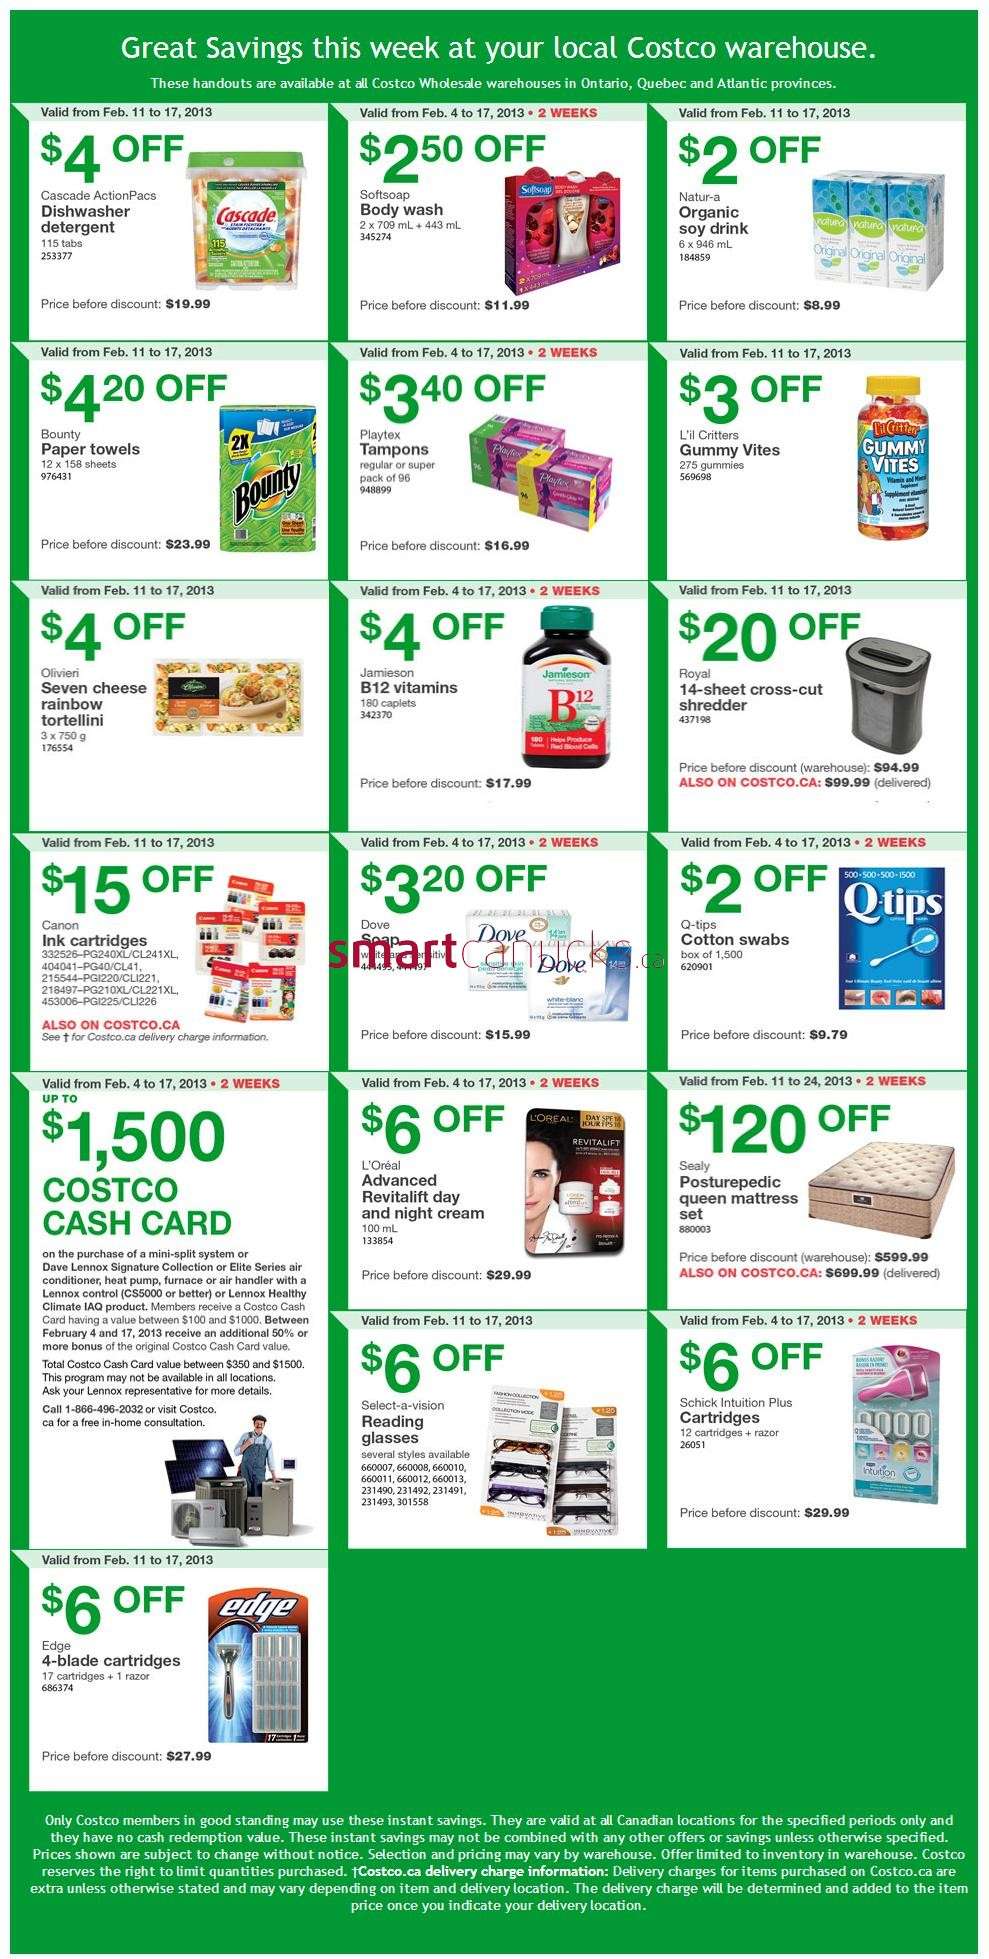 Costco Weekly Savings for Eastern Canada Feb 11 to 17